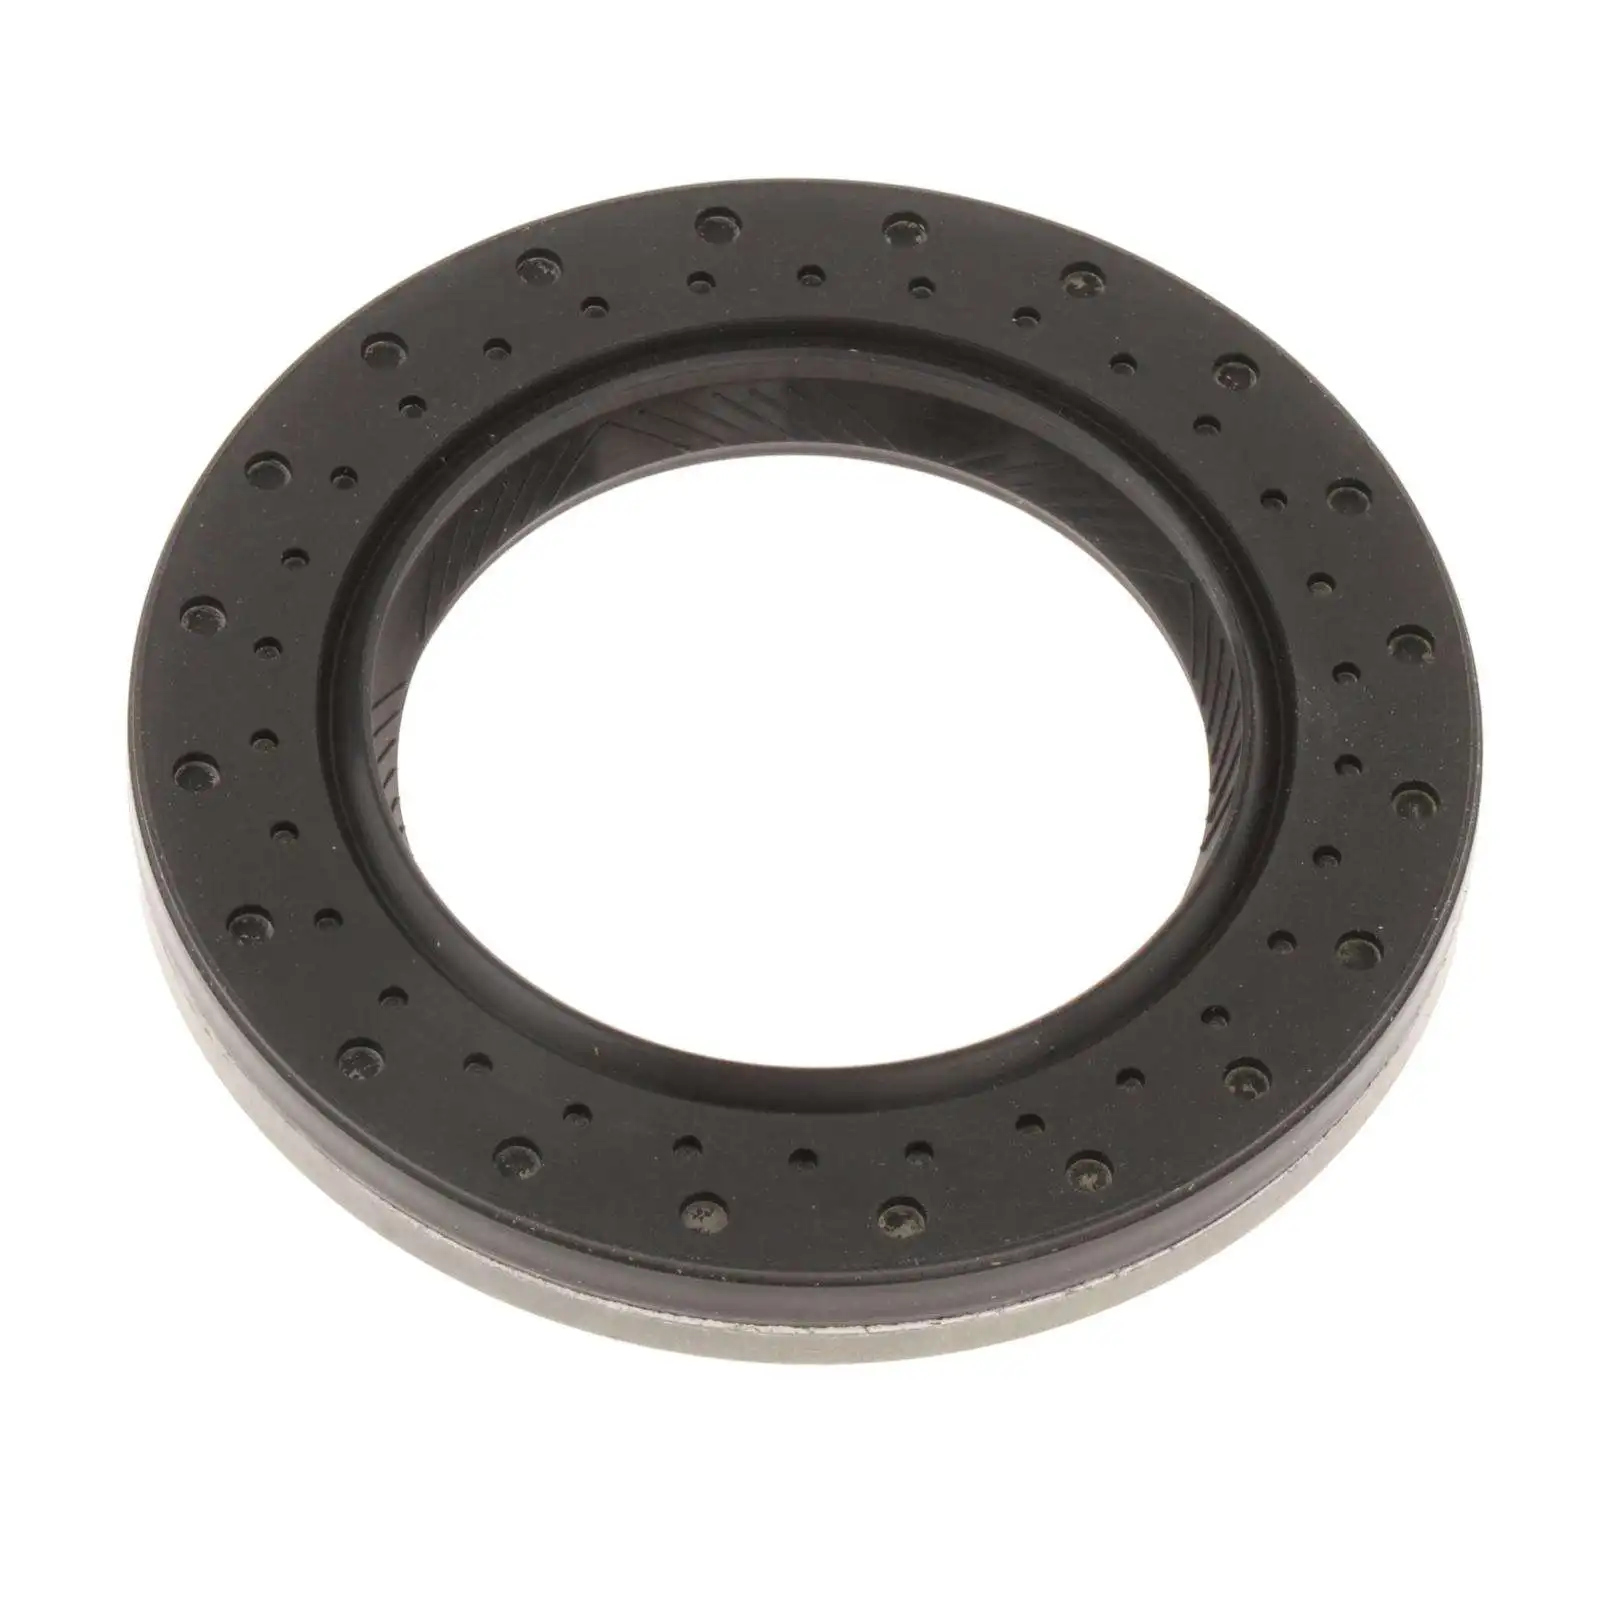 Front Oil Seal Automatic Transmission 6Dct250 Dps6 Oil Seal for Focus Fiesta Rubber Oil Resistance